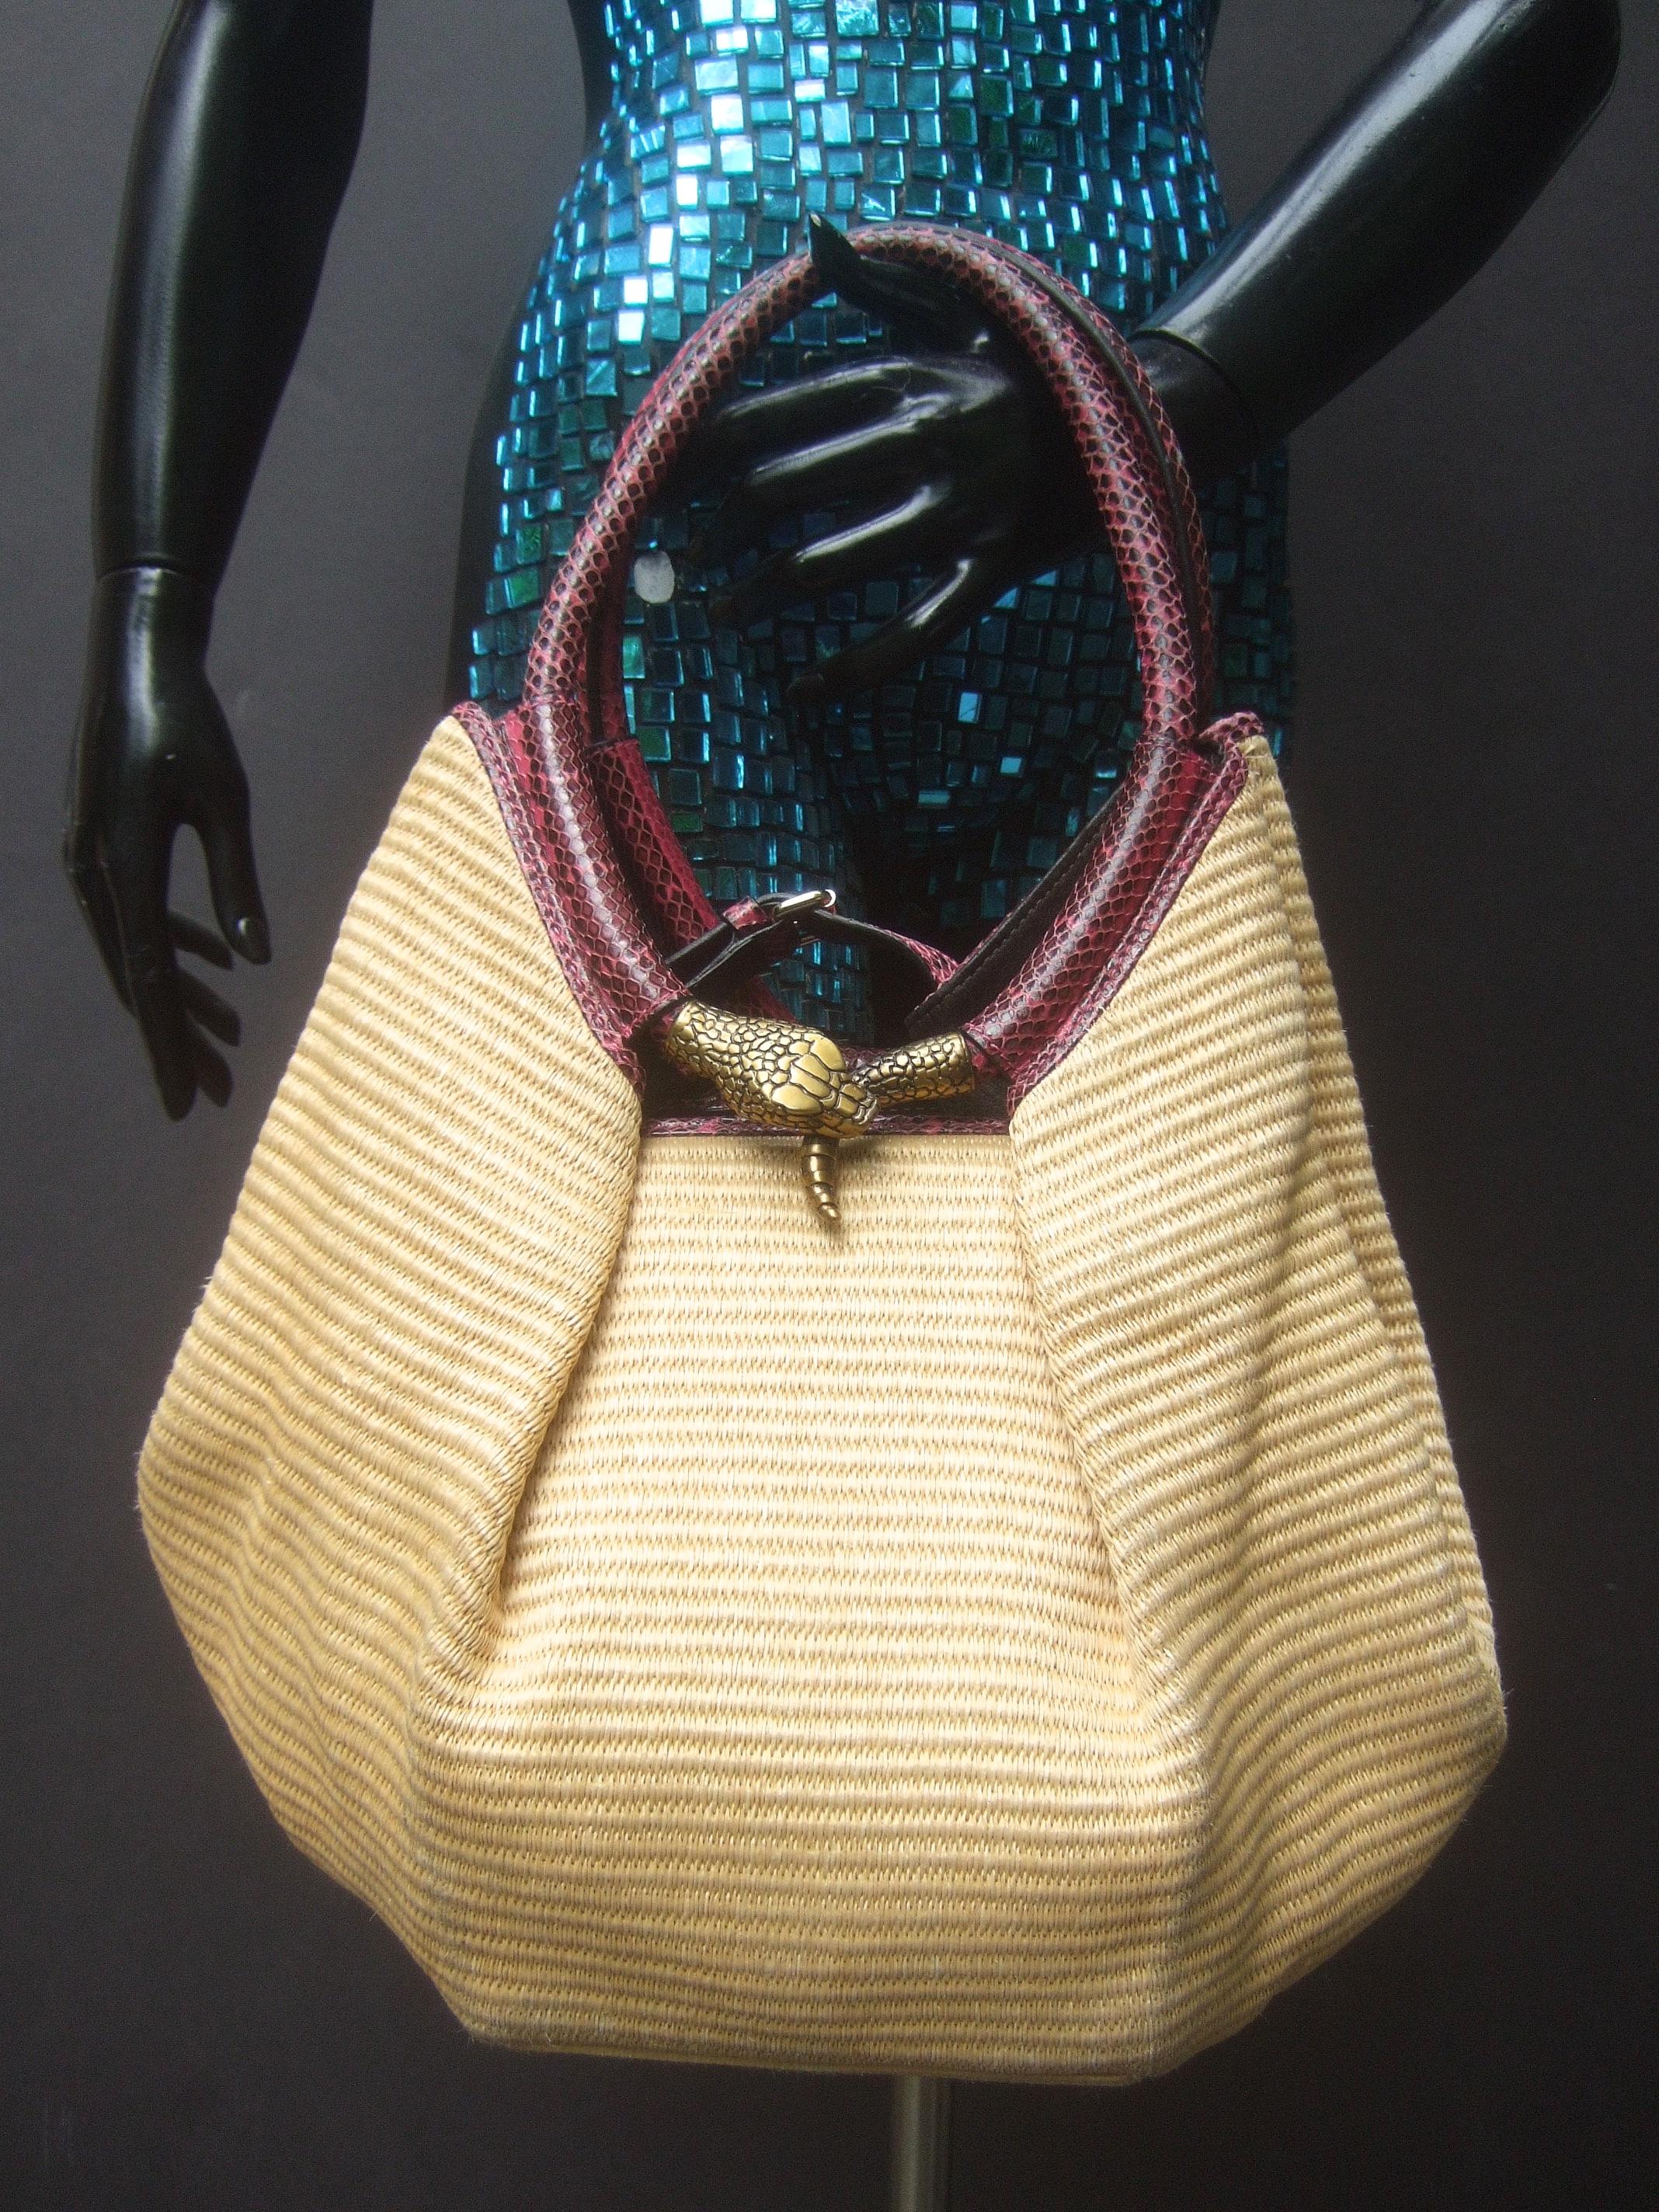 Jimmy Choo Italian straw raffia brass metal serpent medallion handbag c 1990s
The unique Italian handbag is constructed with natural color intricately woven straw raffia bands
Carried with embossed fuchsia pink with darker shades of pink oval-shaped